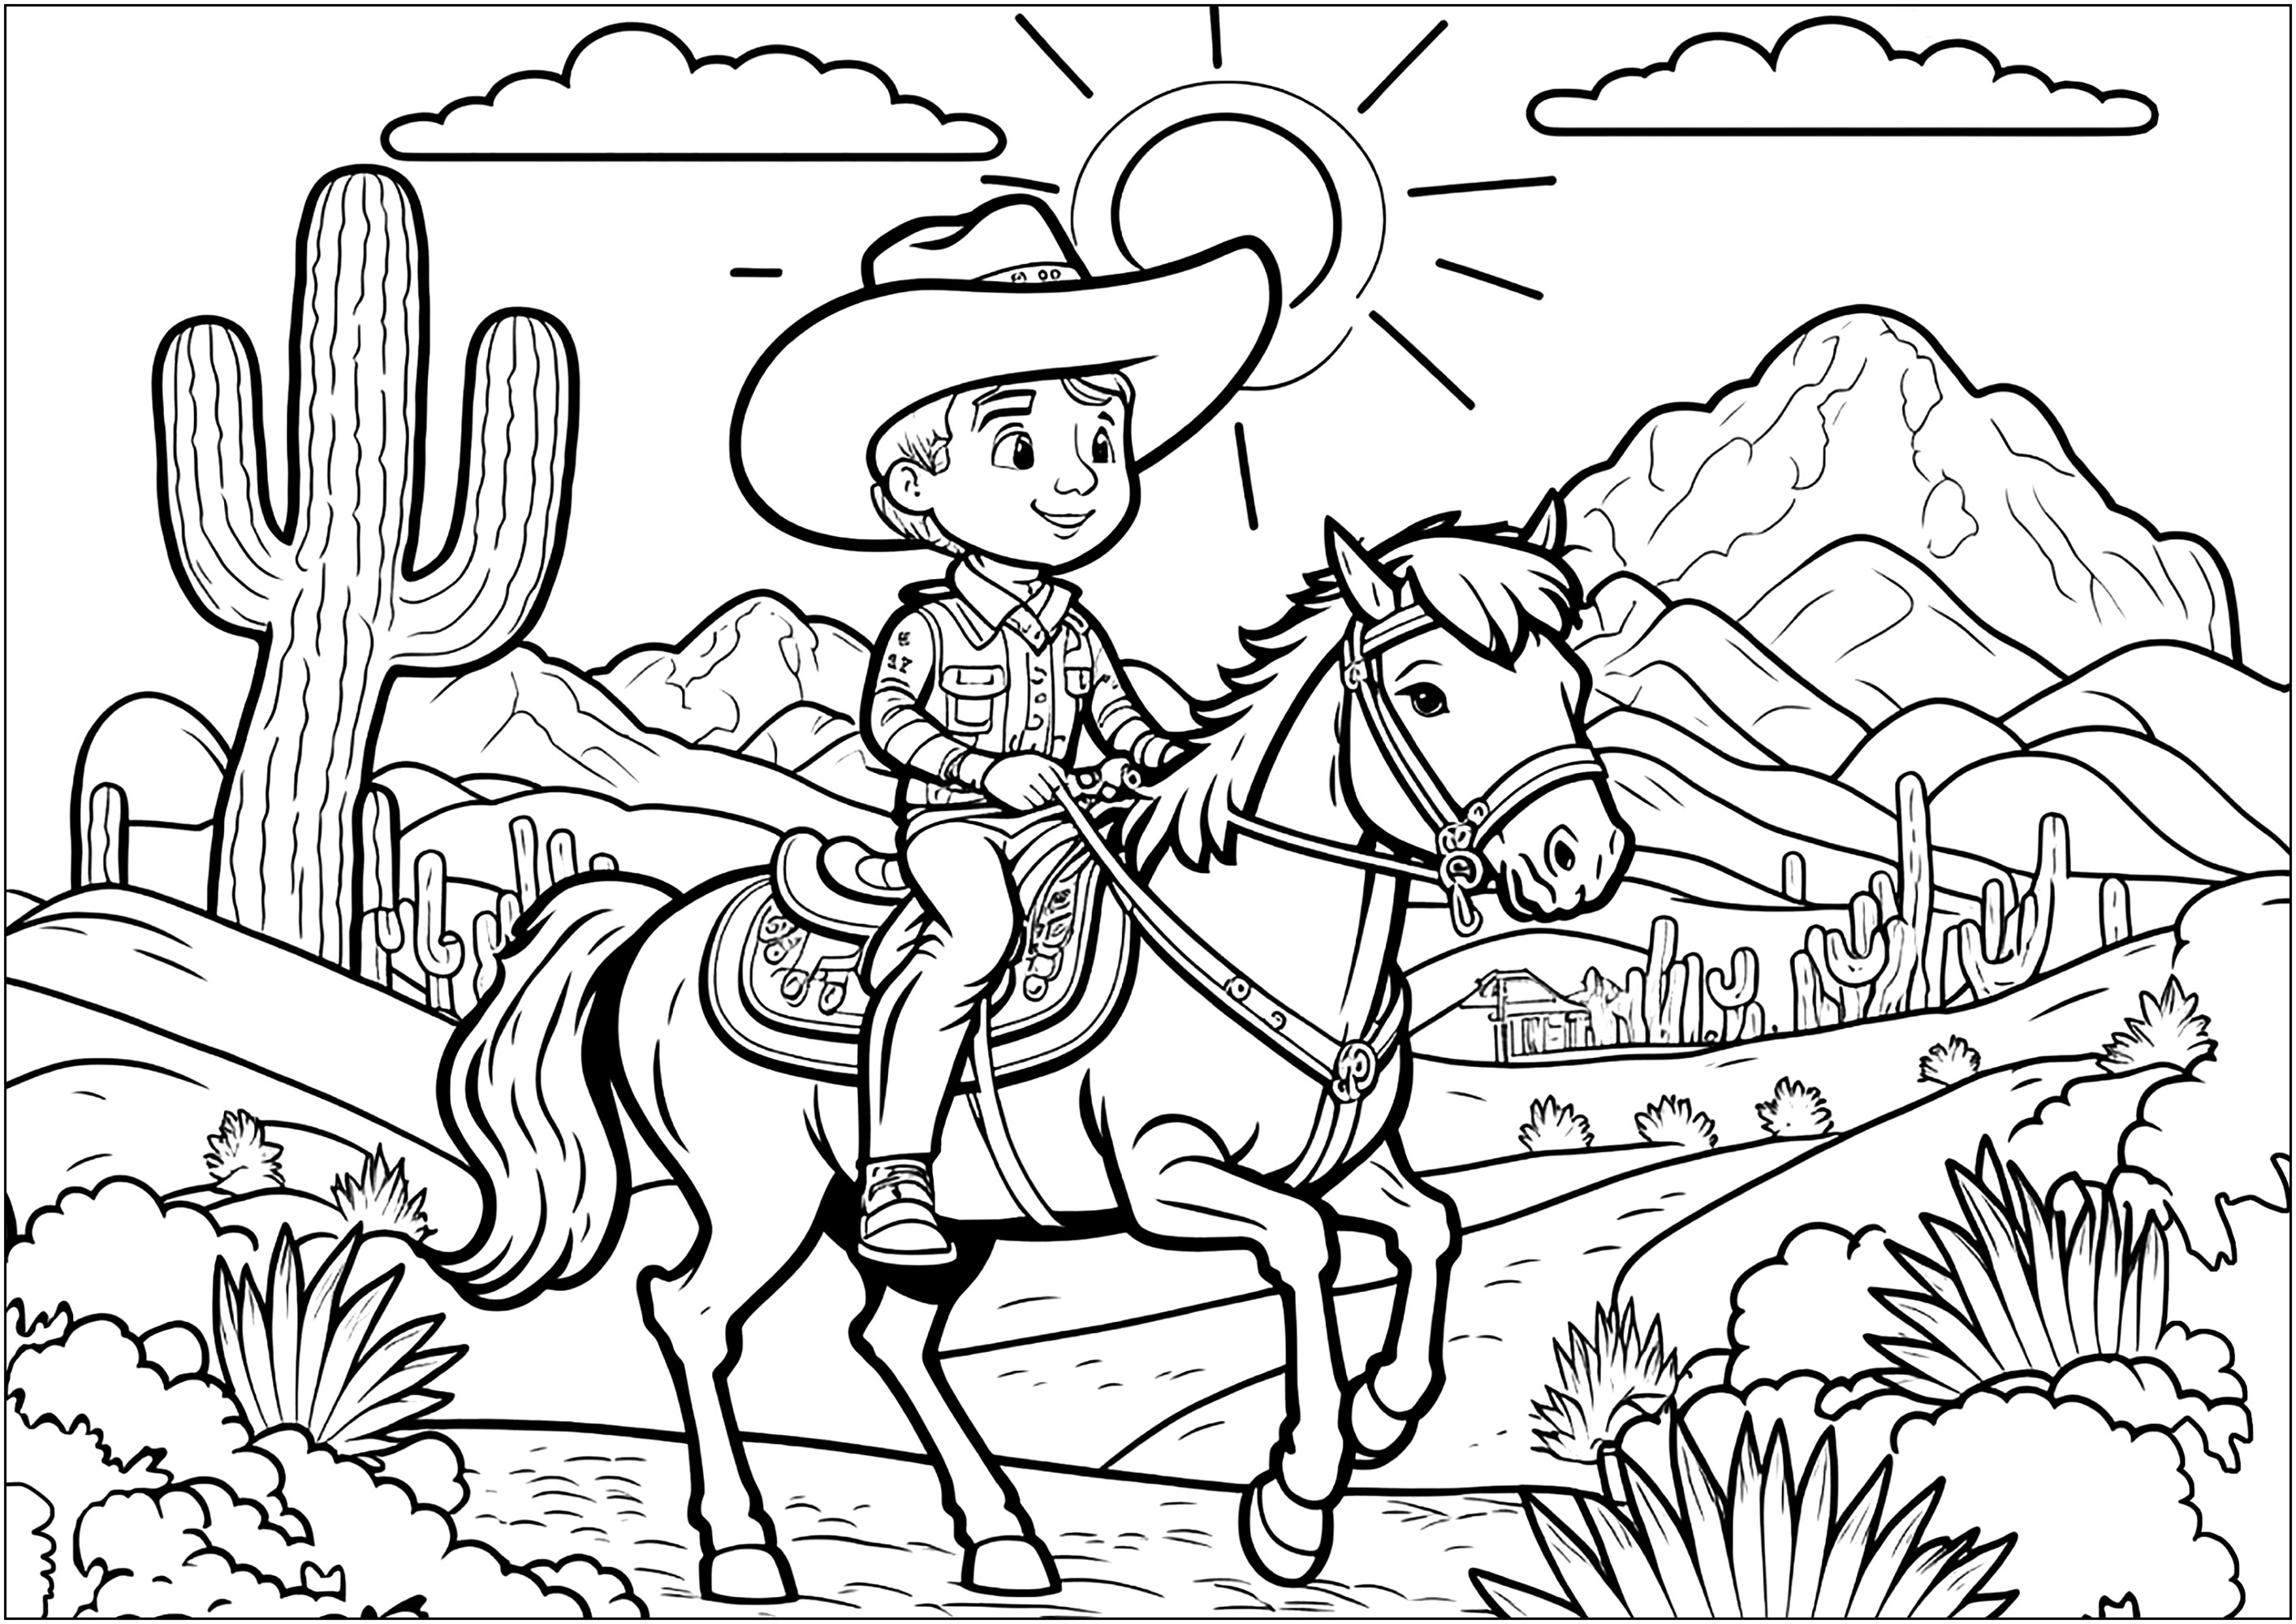 Young Cowboy on his horse, and Wild West landscape, to color